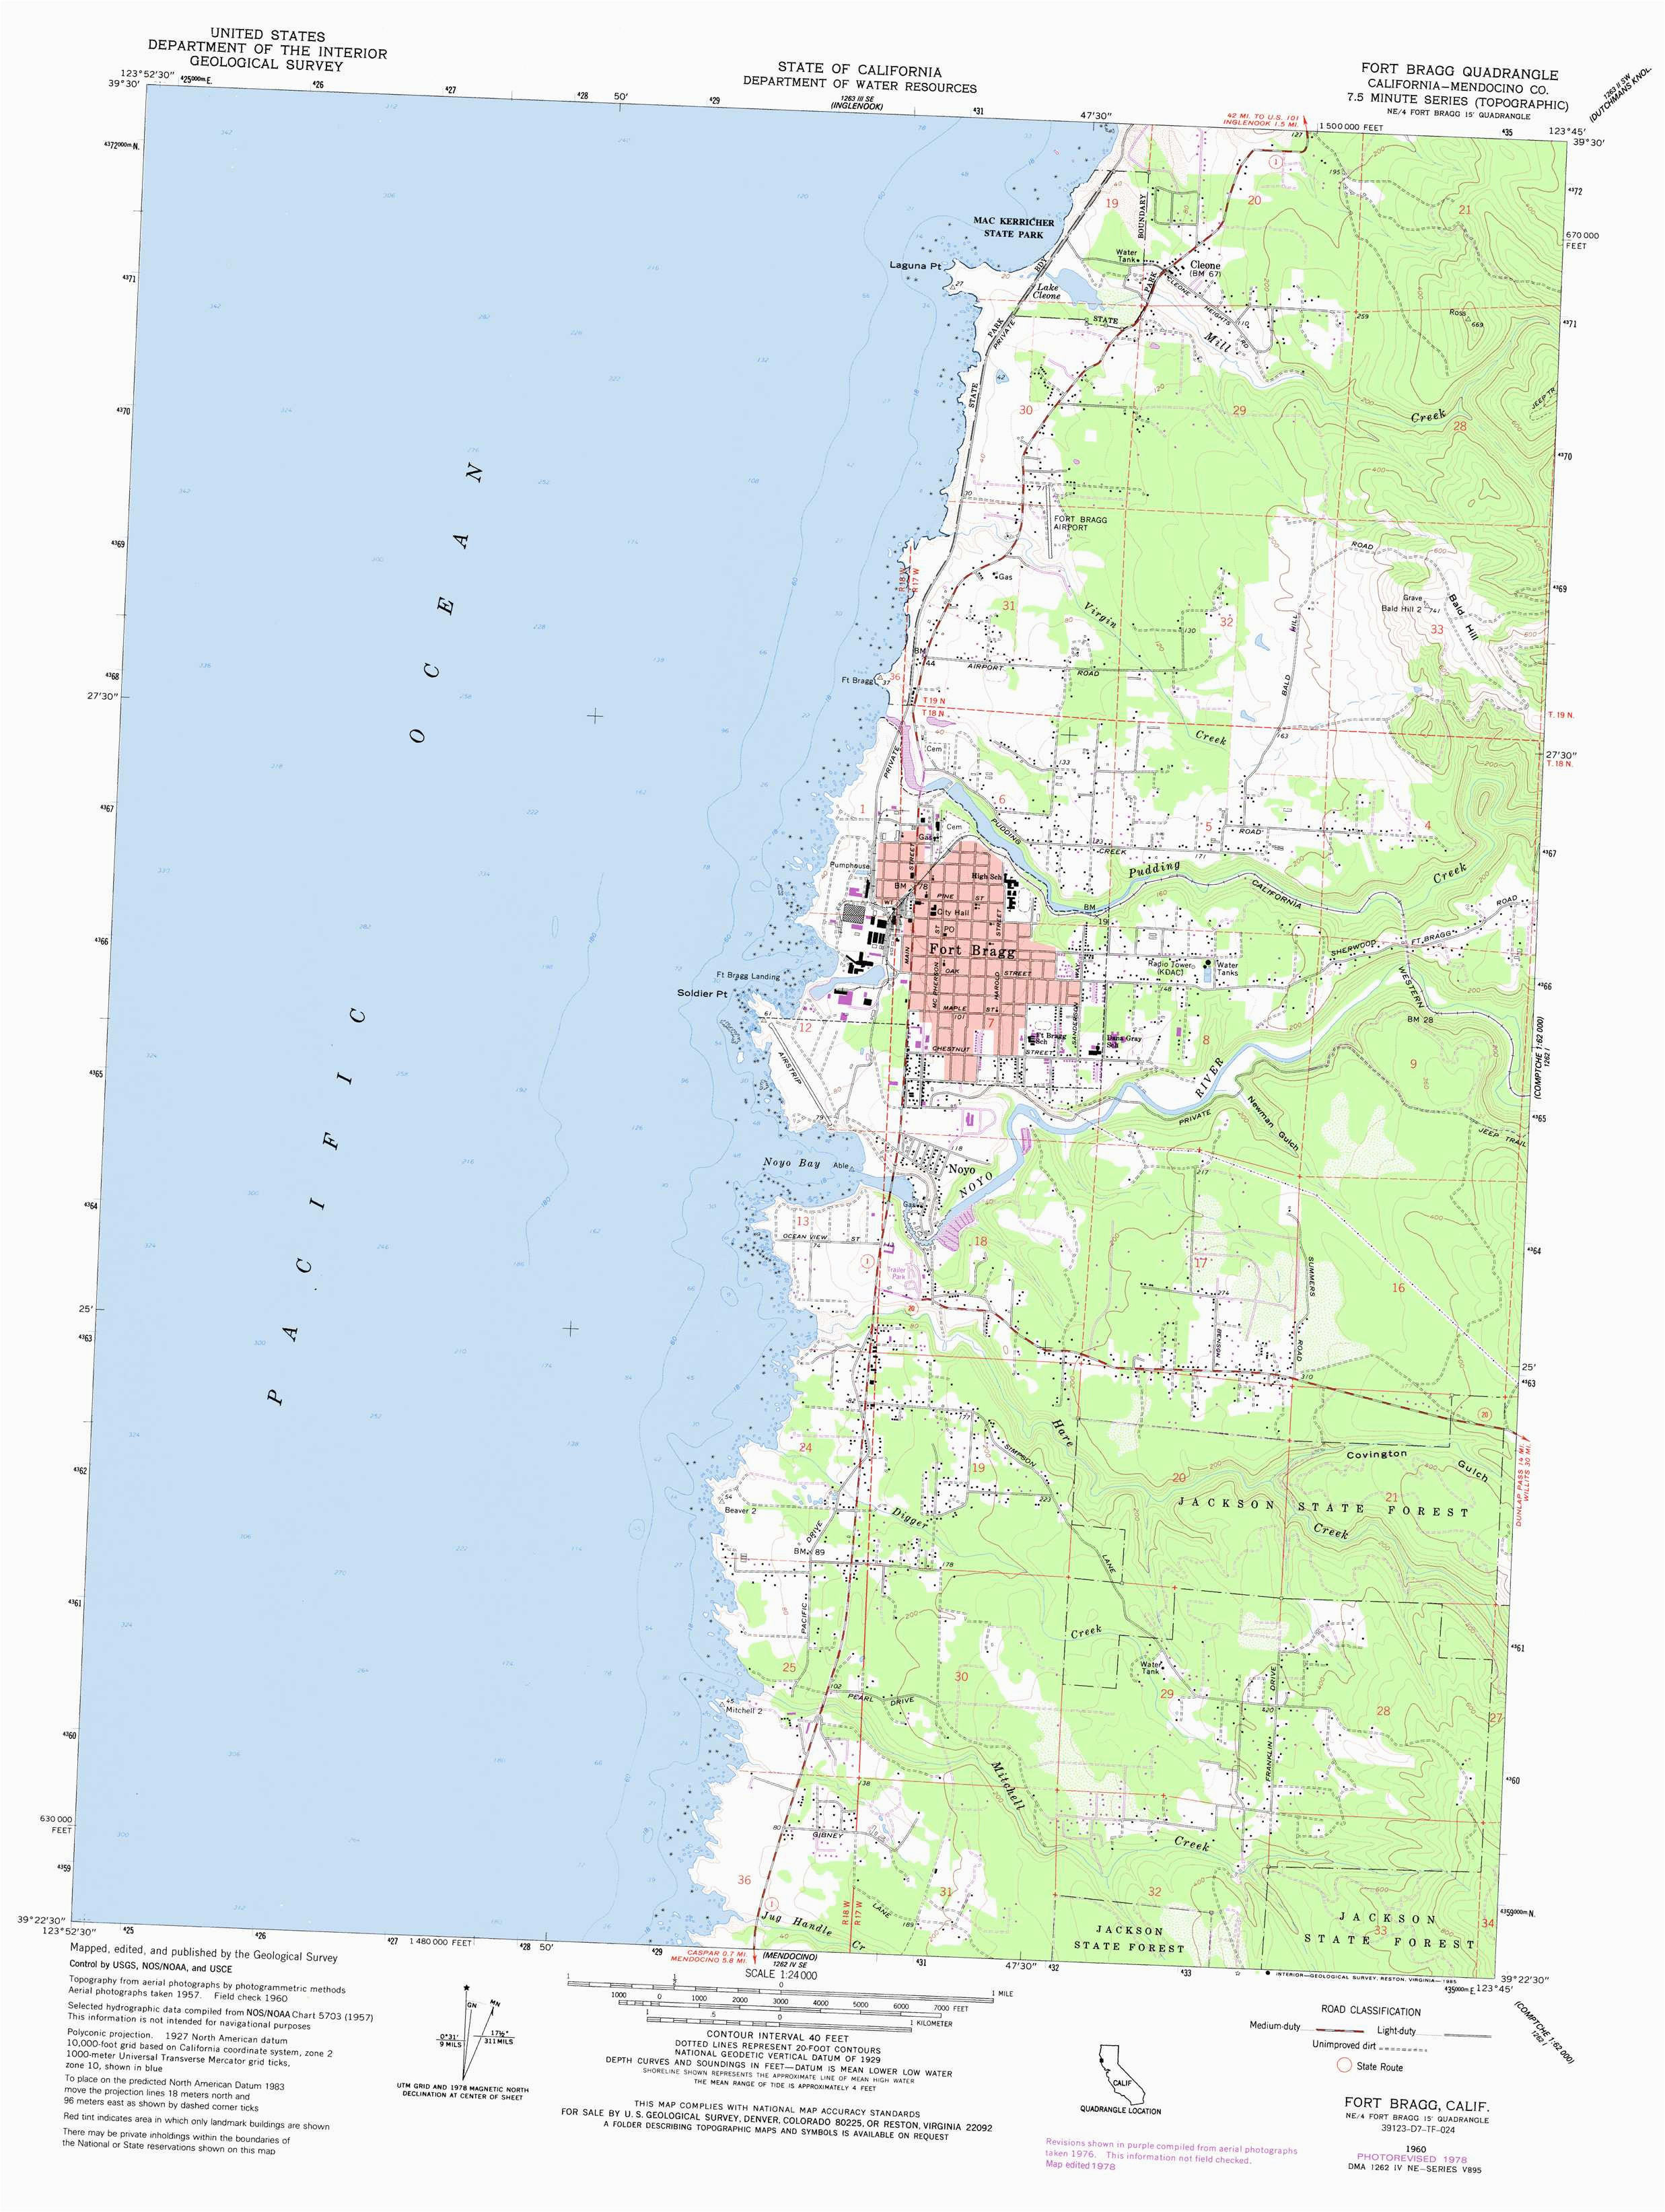 California Earthquake today Map Od Picture Collection Website fort Bragg California Map Reference Hd